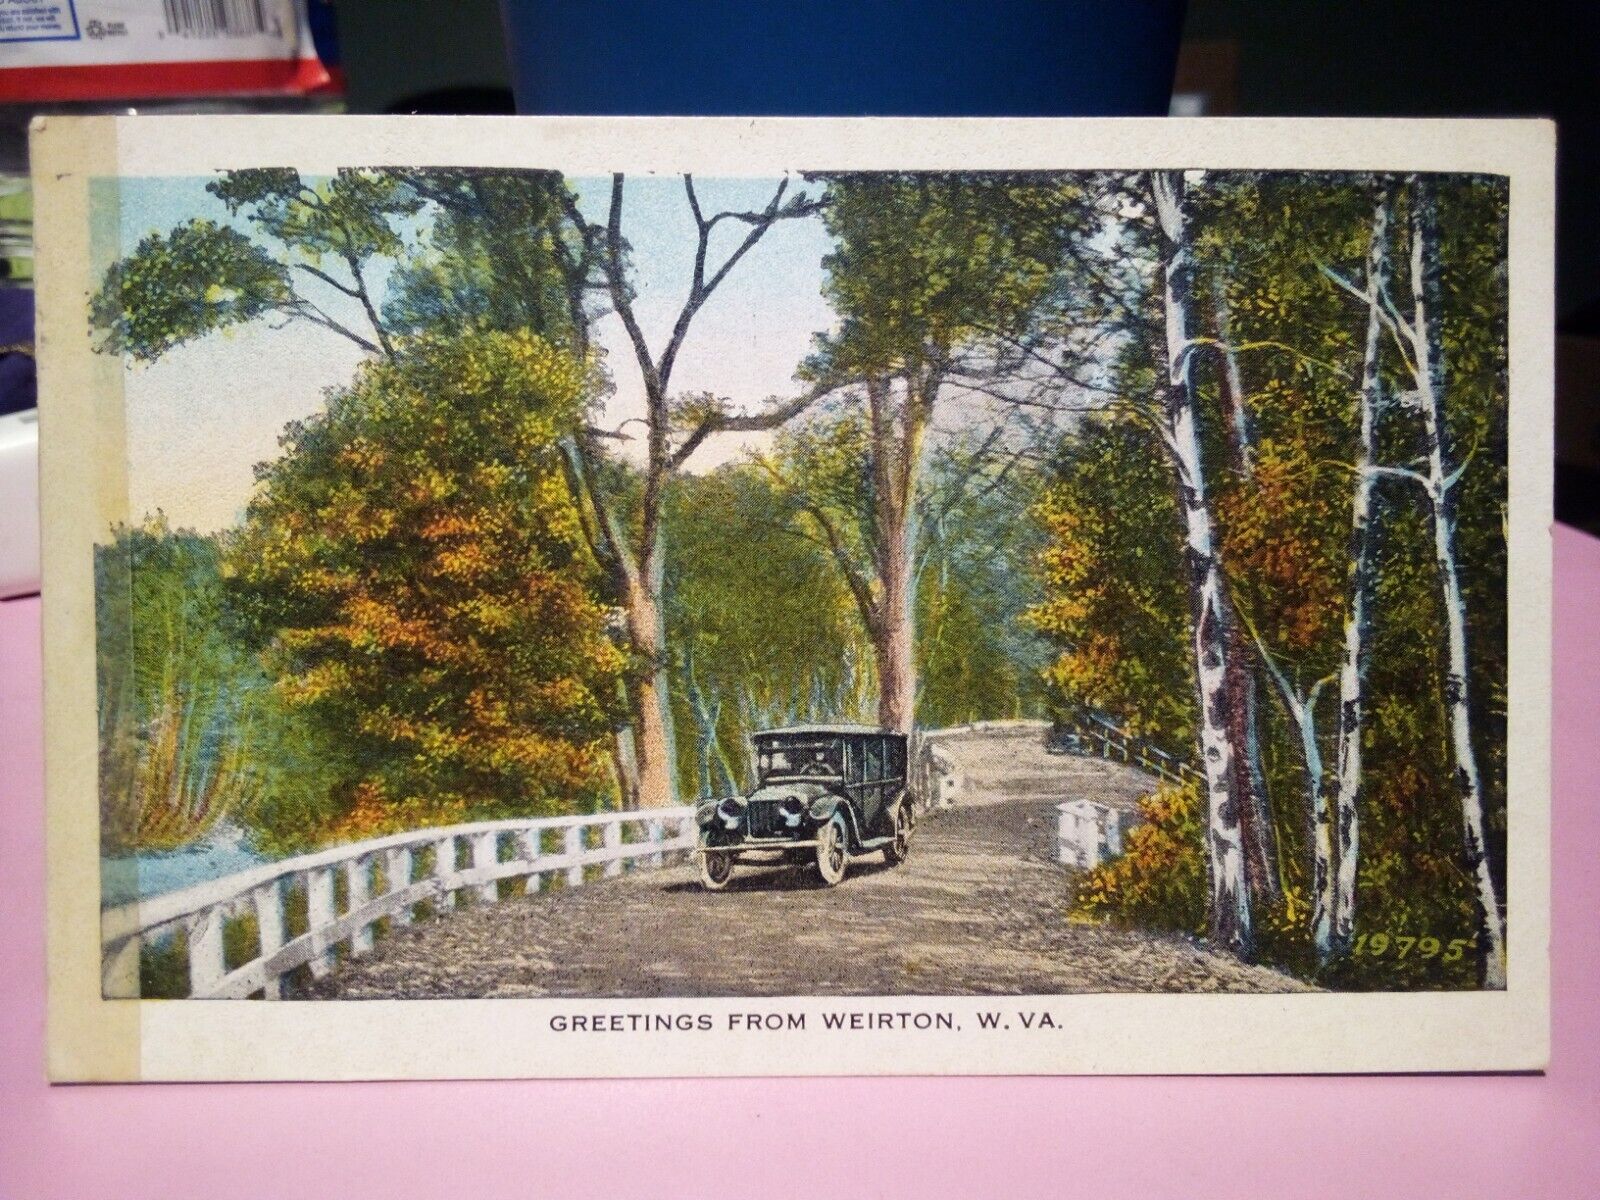 Weirton West Virginia greetings old car 1930